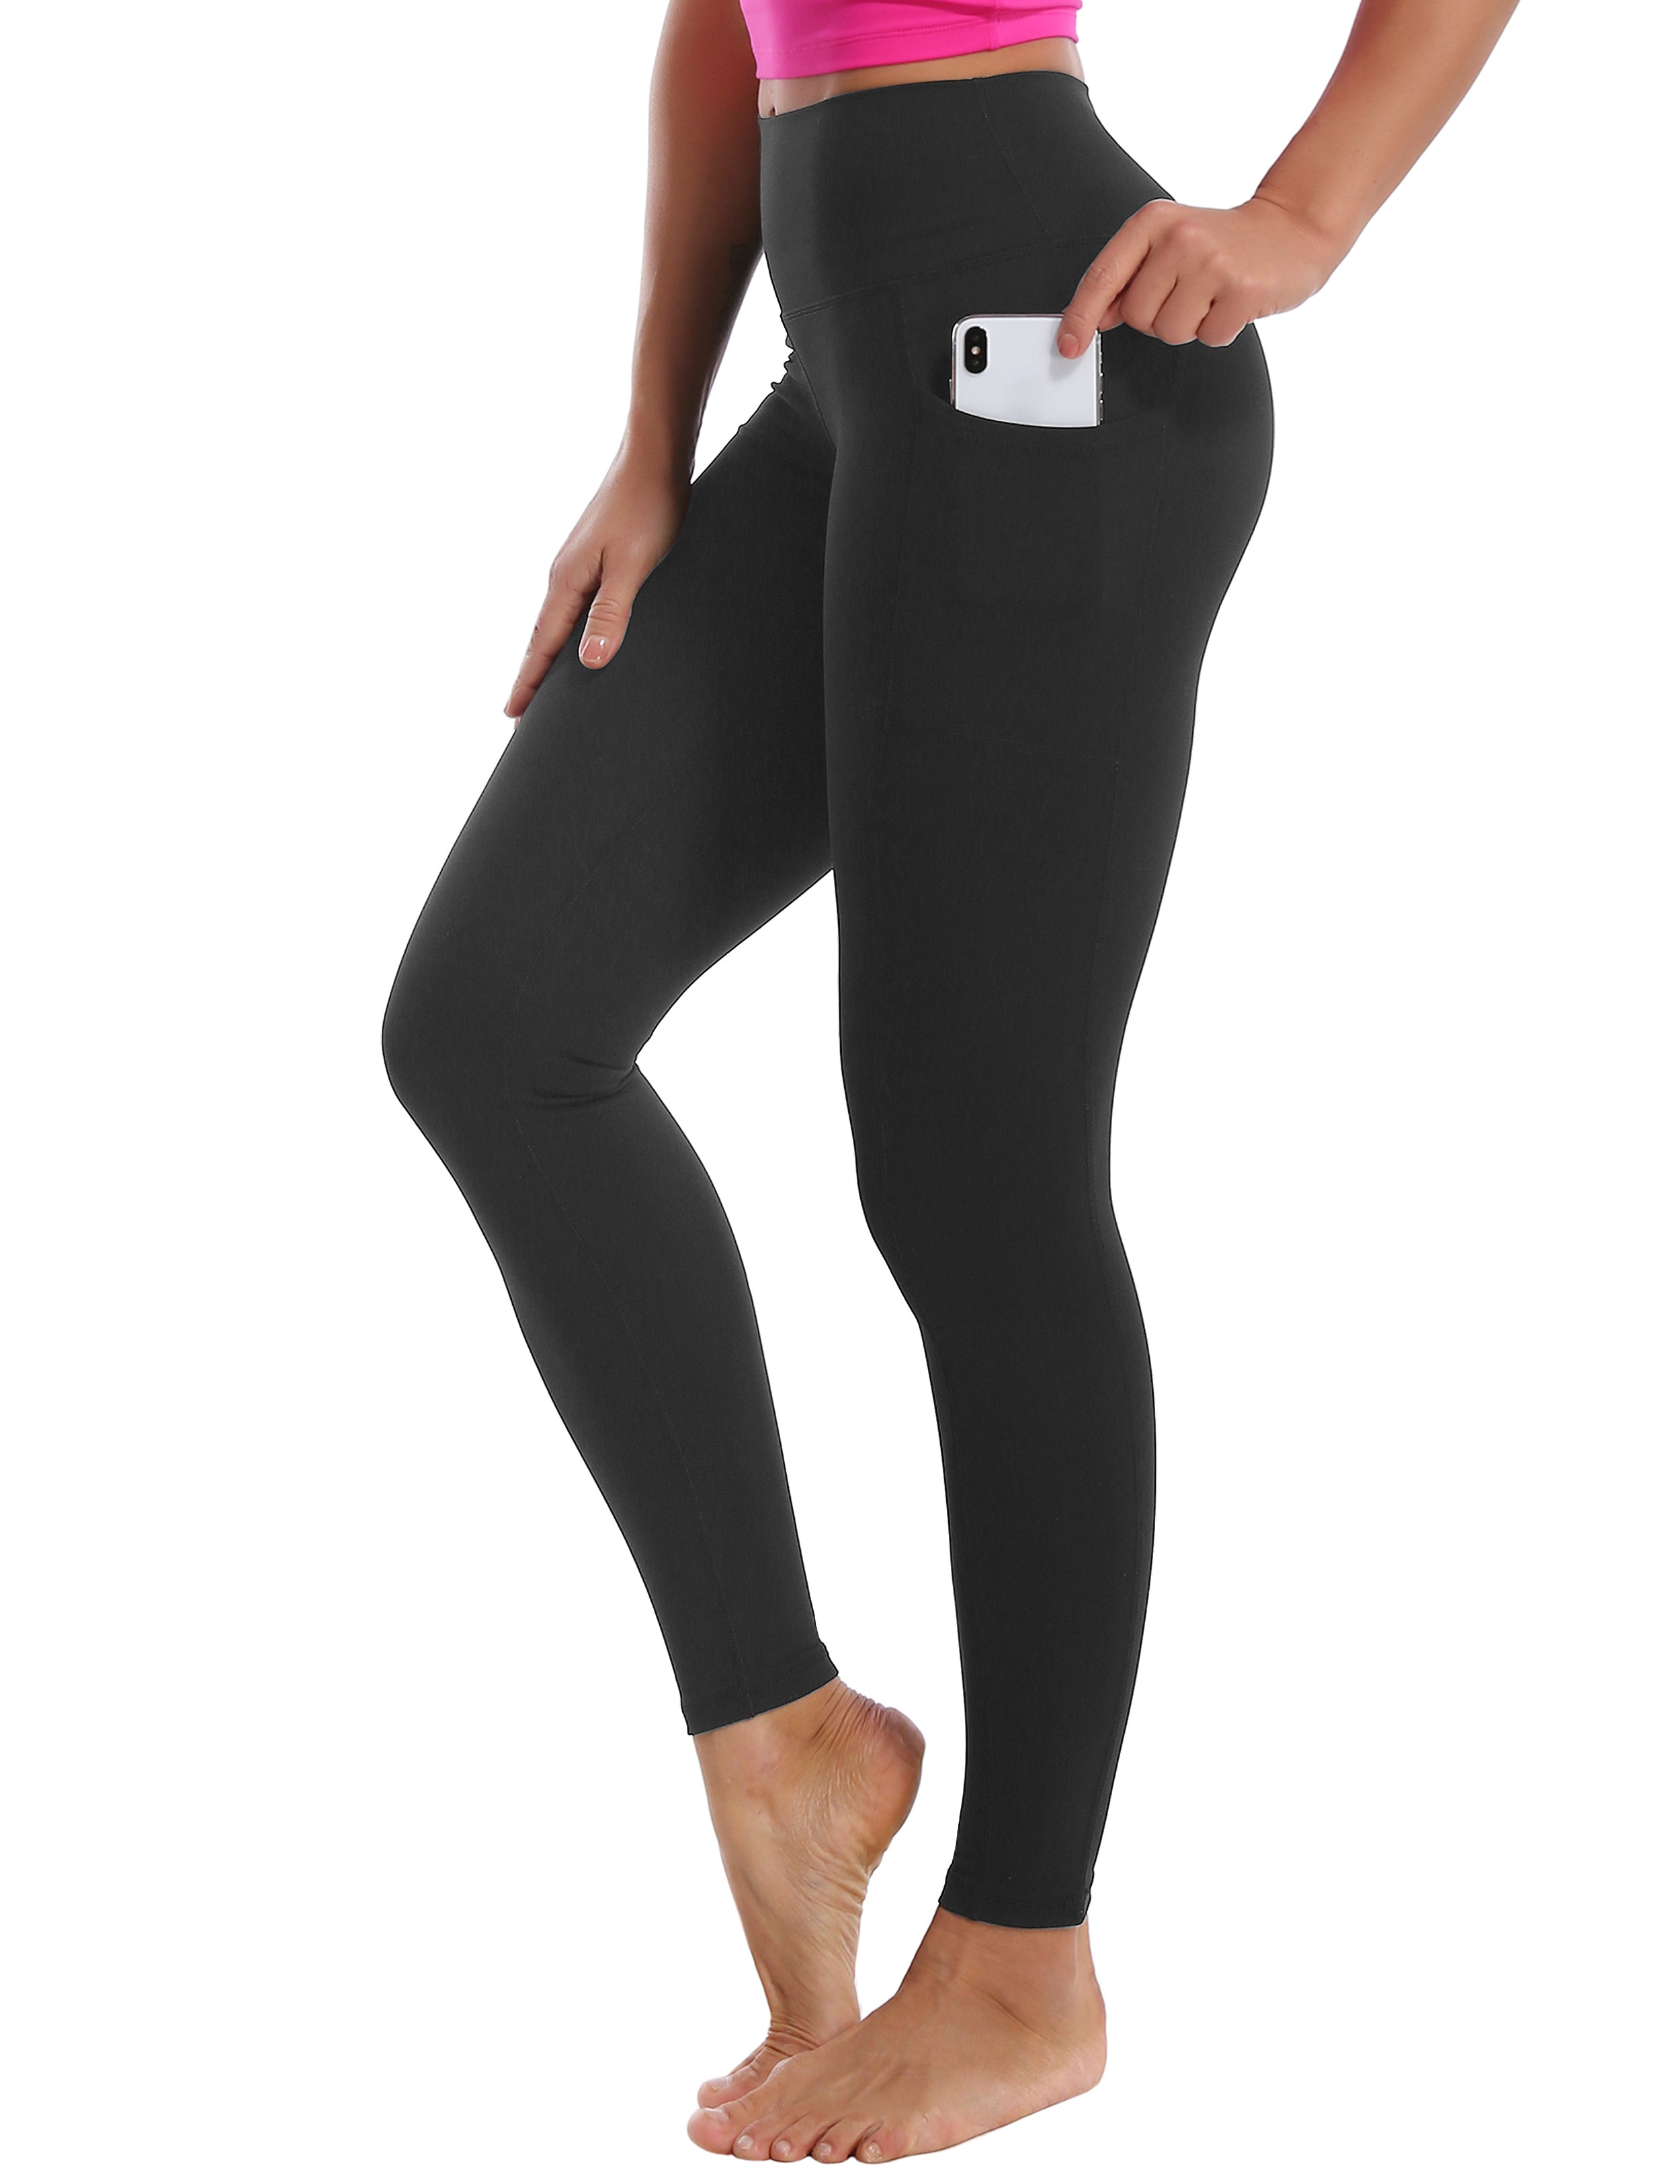 High Waisted Running Pants 7/8 Length Leggings with Pockets charcoalgrey_Running